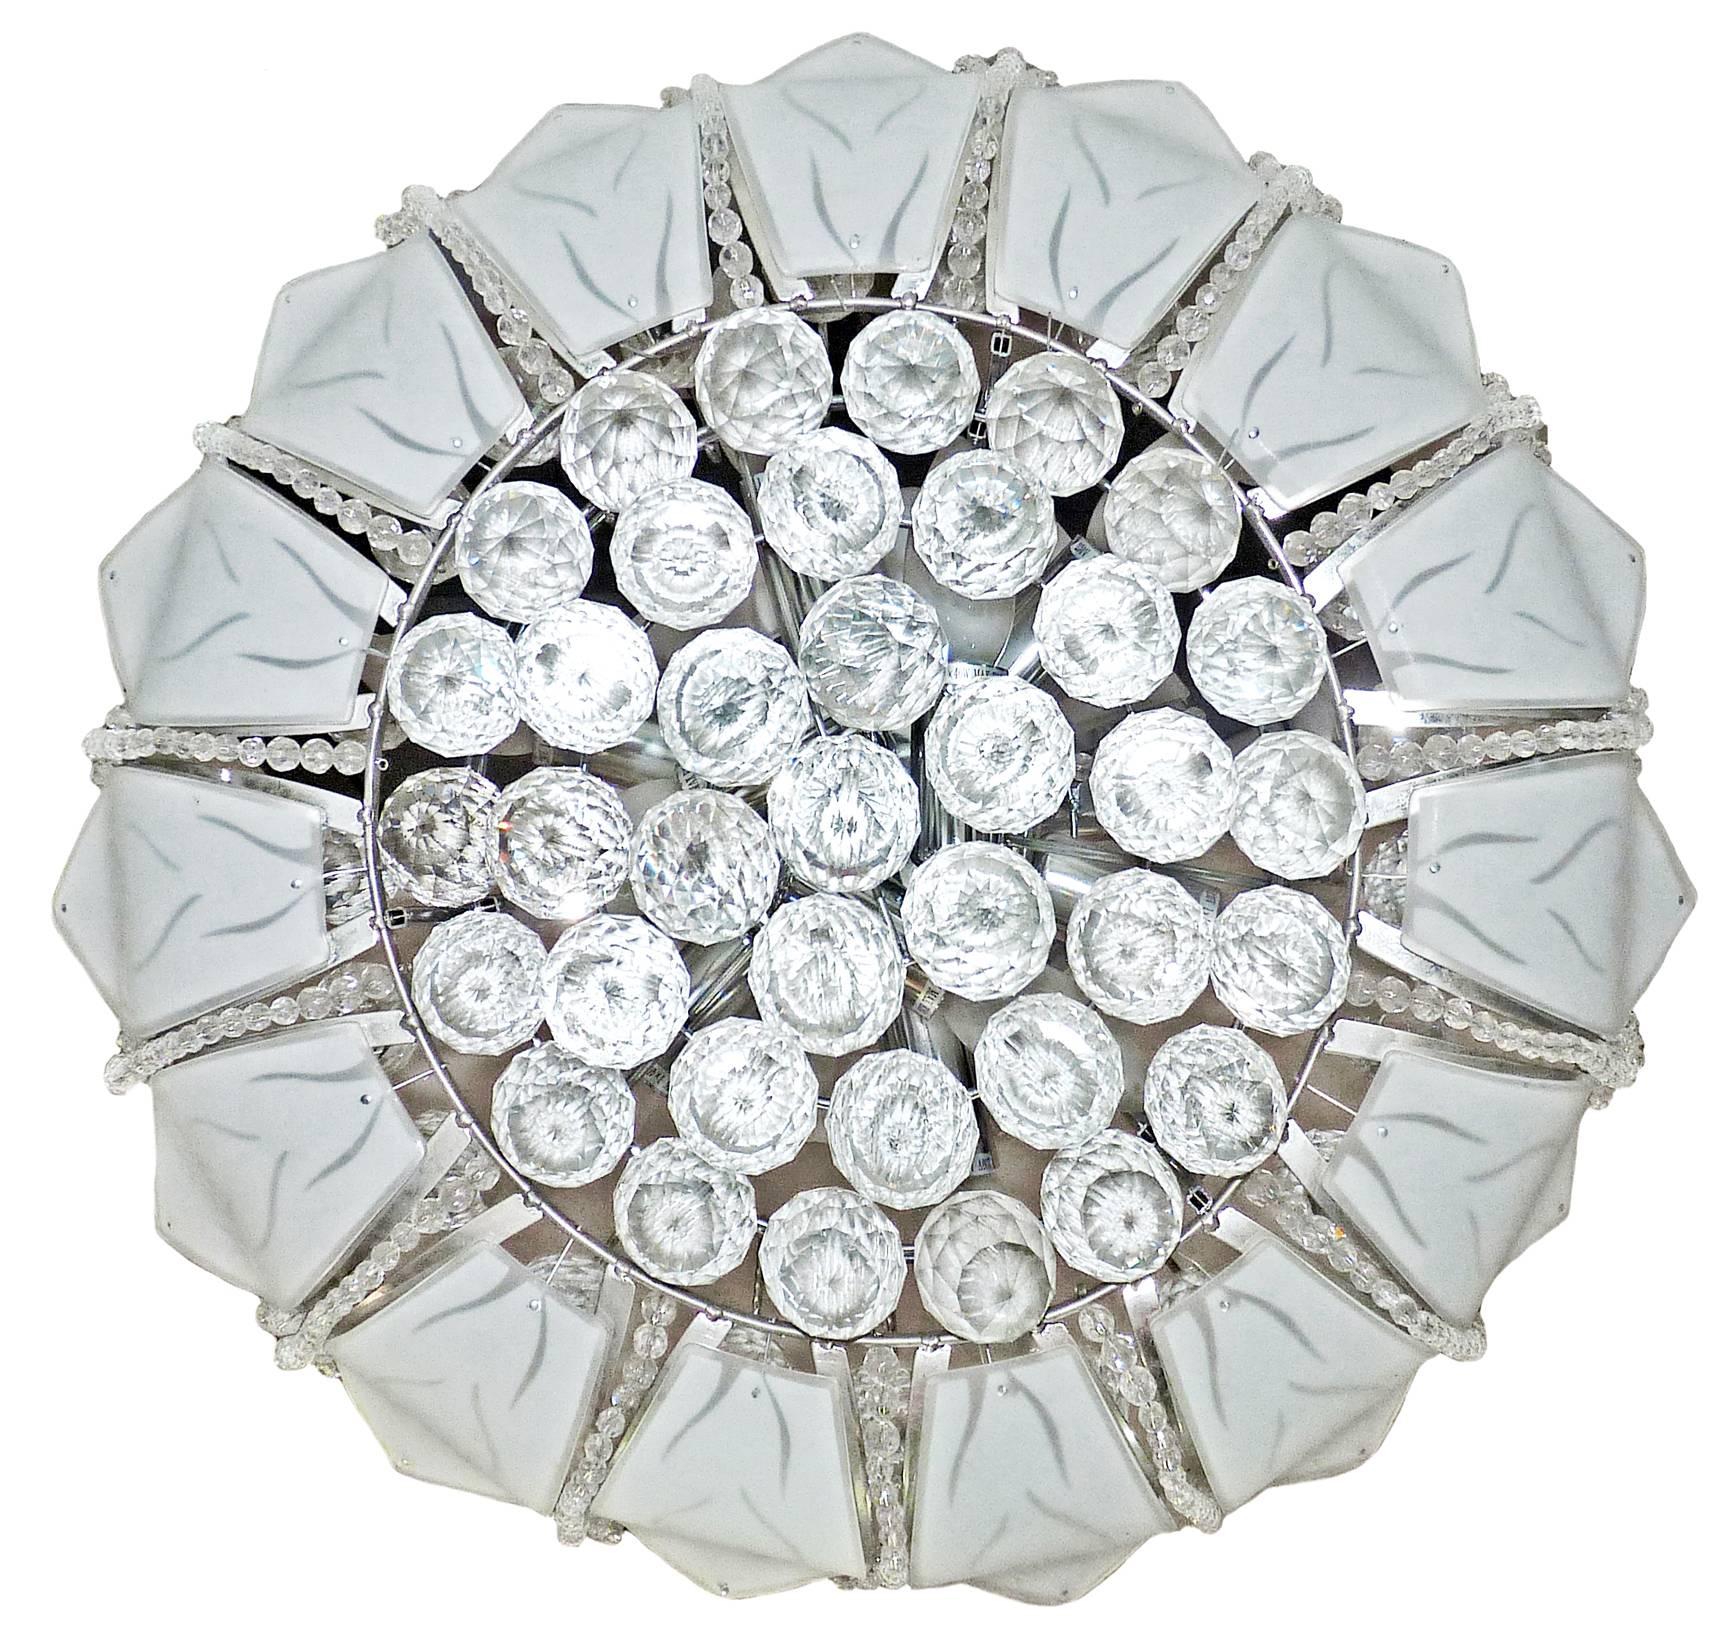 Gorgeous Hollywood Regency chandelier with double tier in crystal, chrome, frosted glass flower shades and 12 light bulbs

Measure: Diameter 24 in / 60 cm
Height 30 in / 76 cm 
Weight 24 lb. (11 kg) 
Twelve-light bulbs E14 / good working